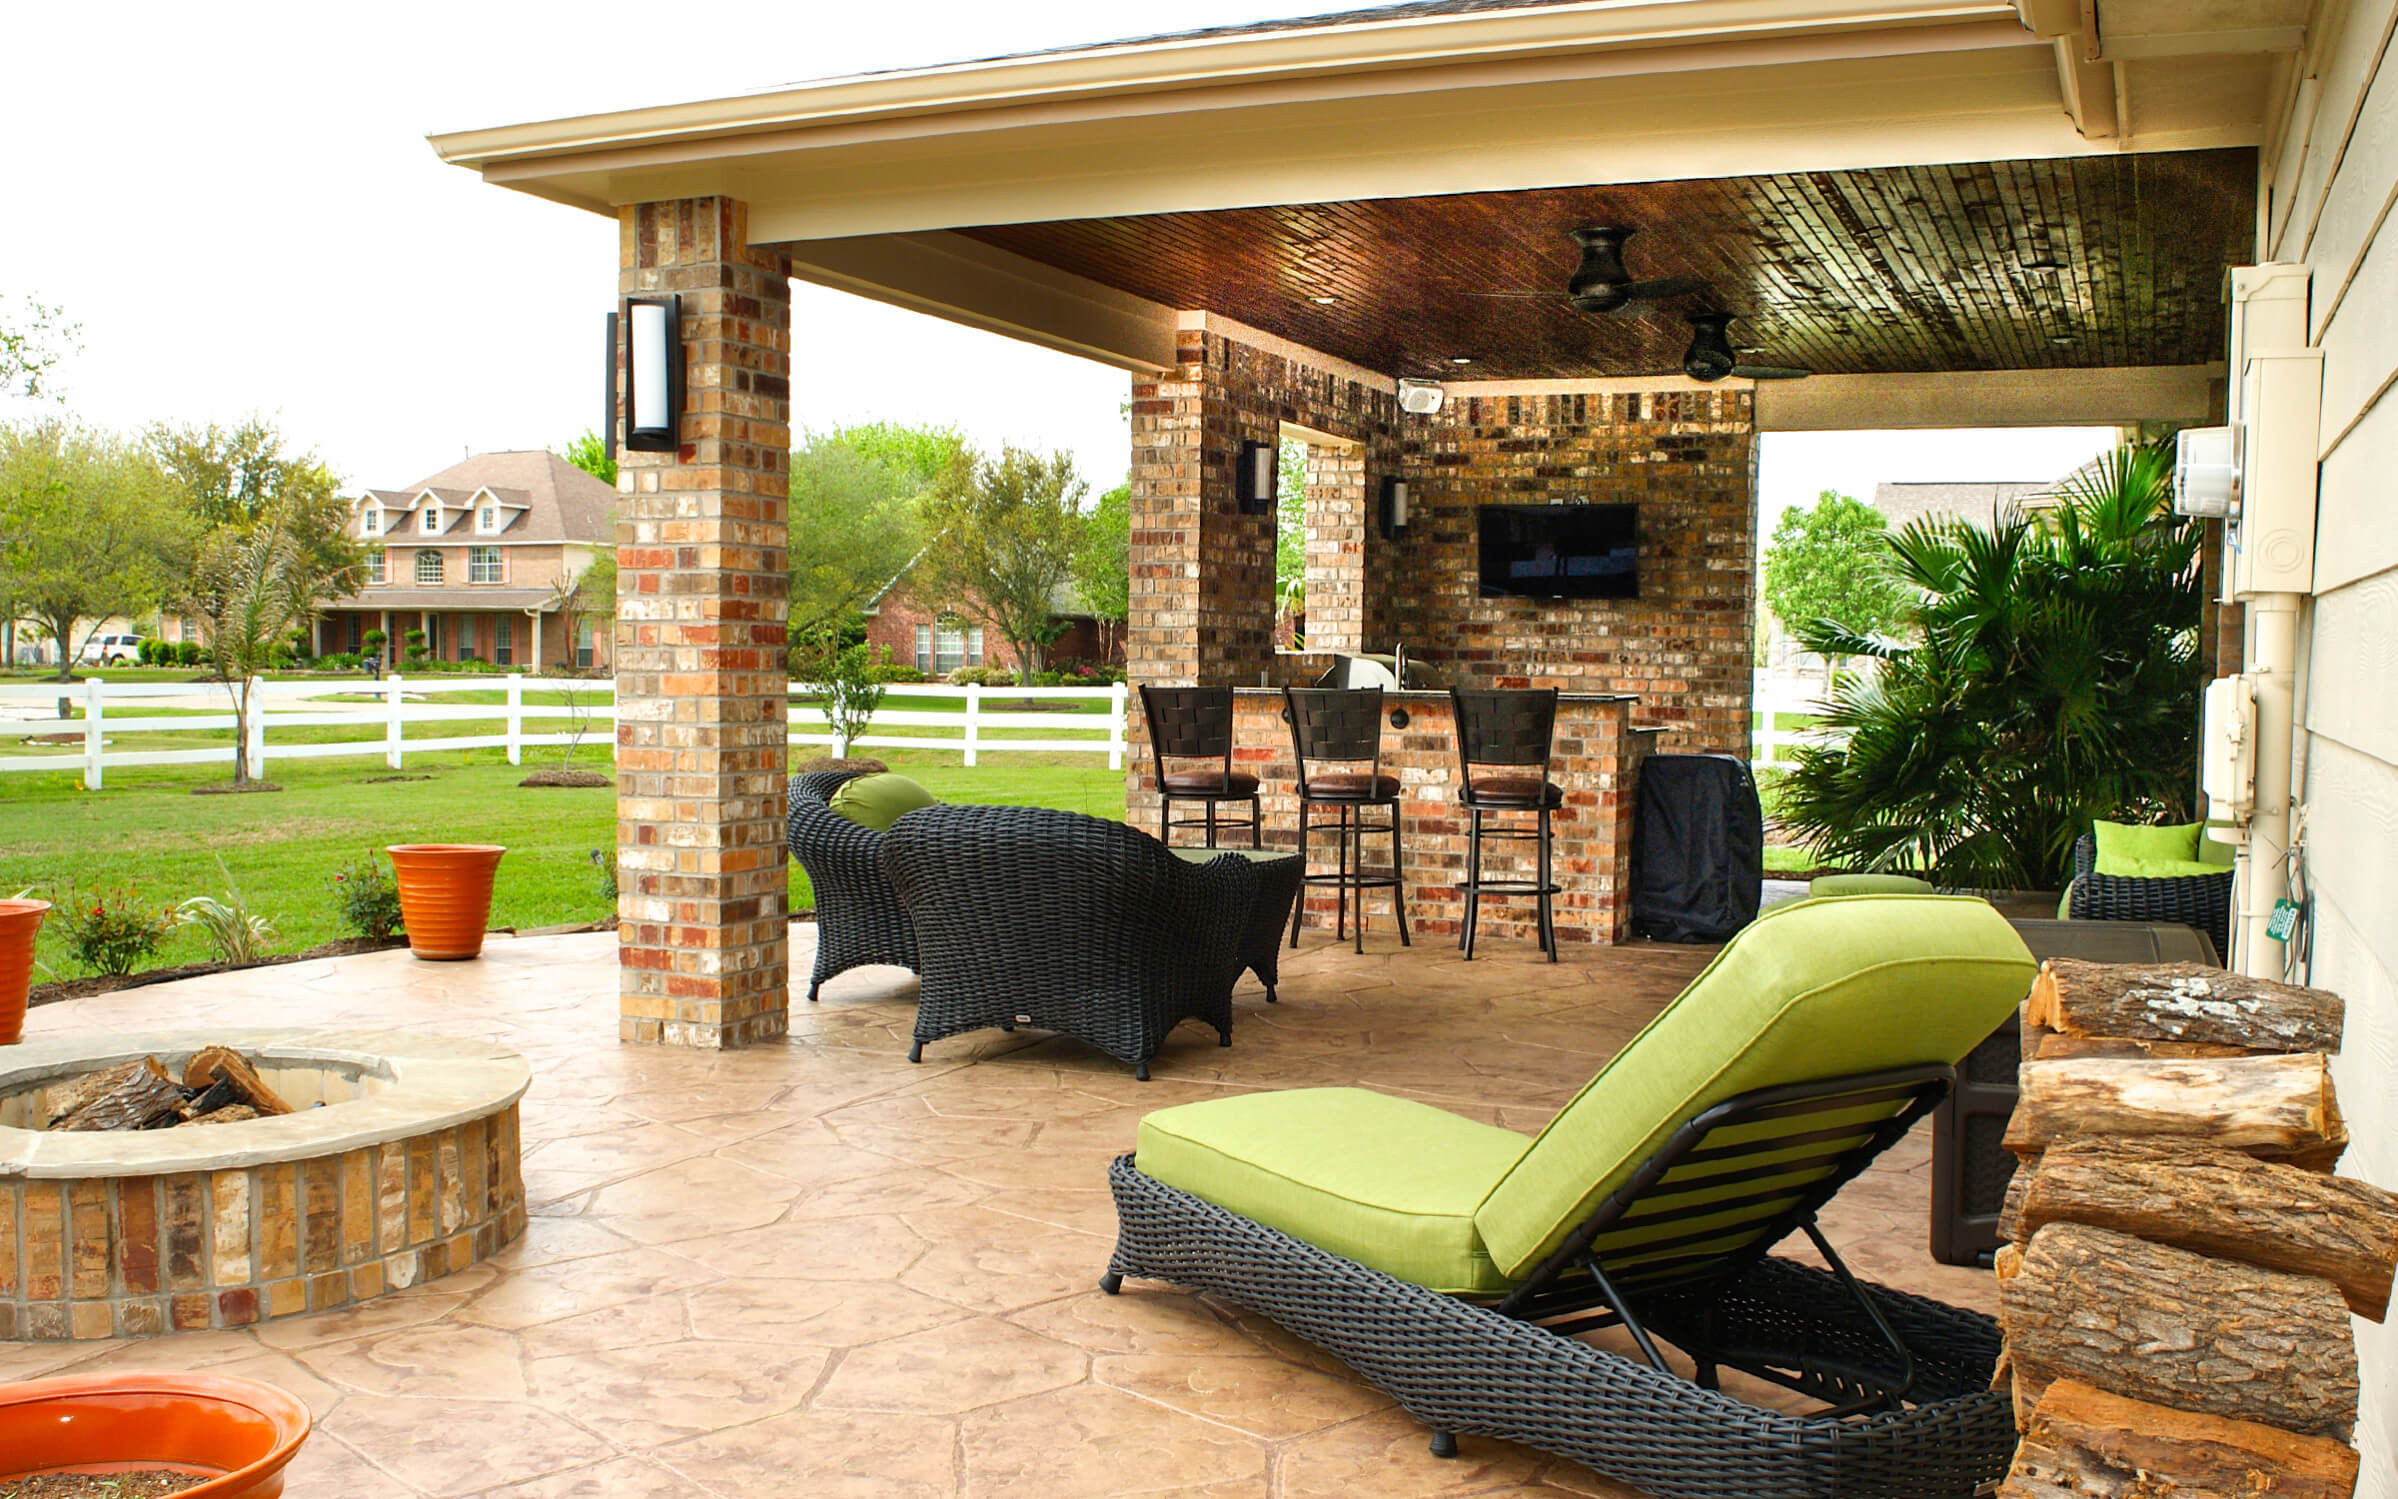 Covered Outdoor Kitchen Plans
 Patio Cover & Outdoor Kitchen in Pearland Estates Texas